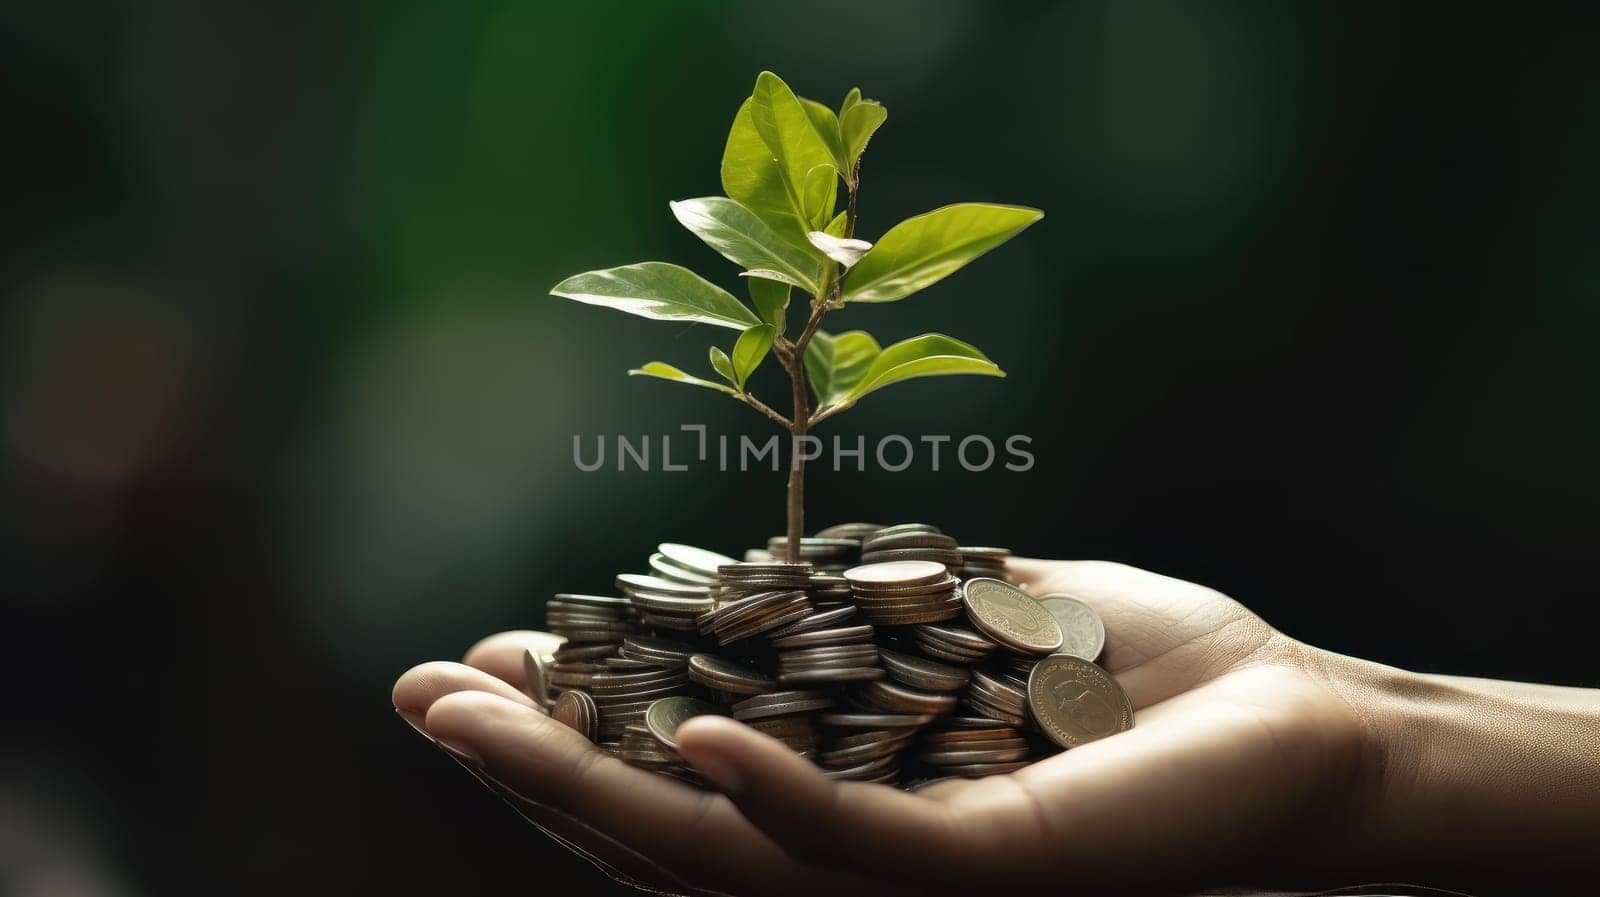 Hand Cradles Sapling Above Silver Coins. Innovative Green Business Ideas for Finance and Investment. Conceptual Image of Carbon Credits and Eco-Friendly Taxation. Planting the Seeds of Financial by ViShark